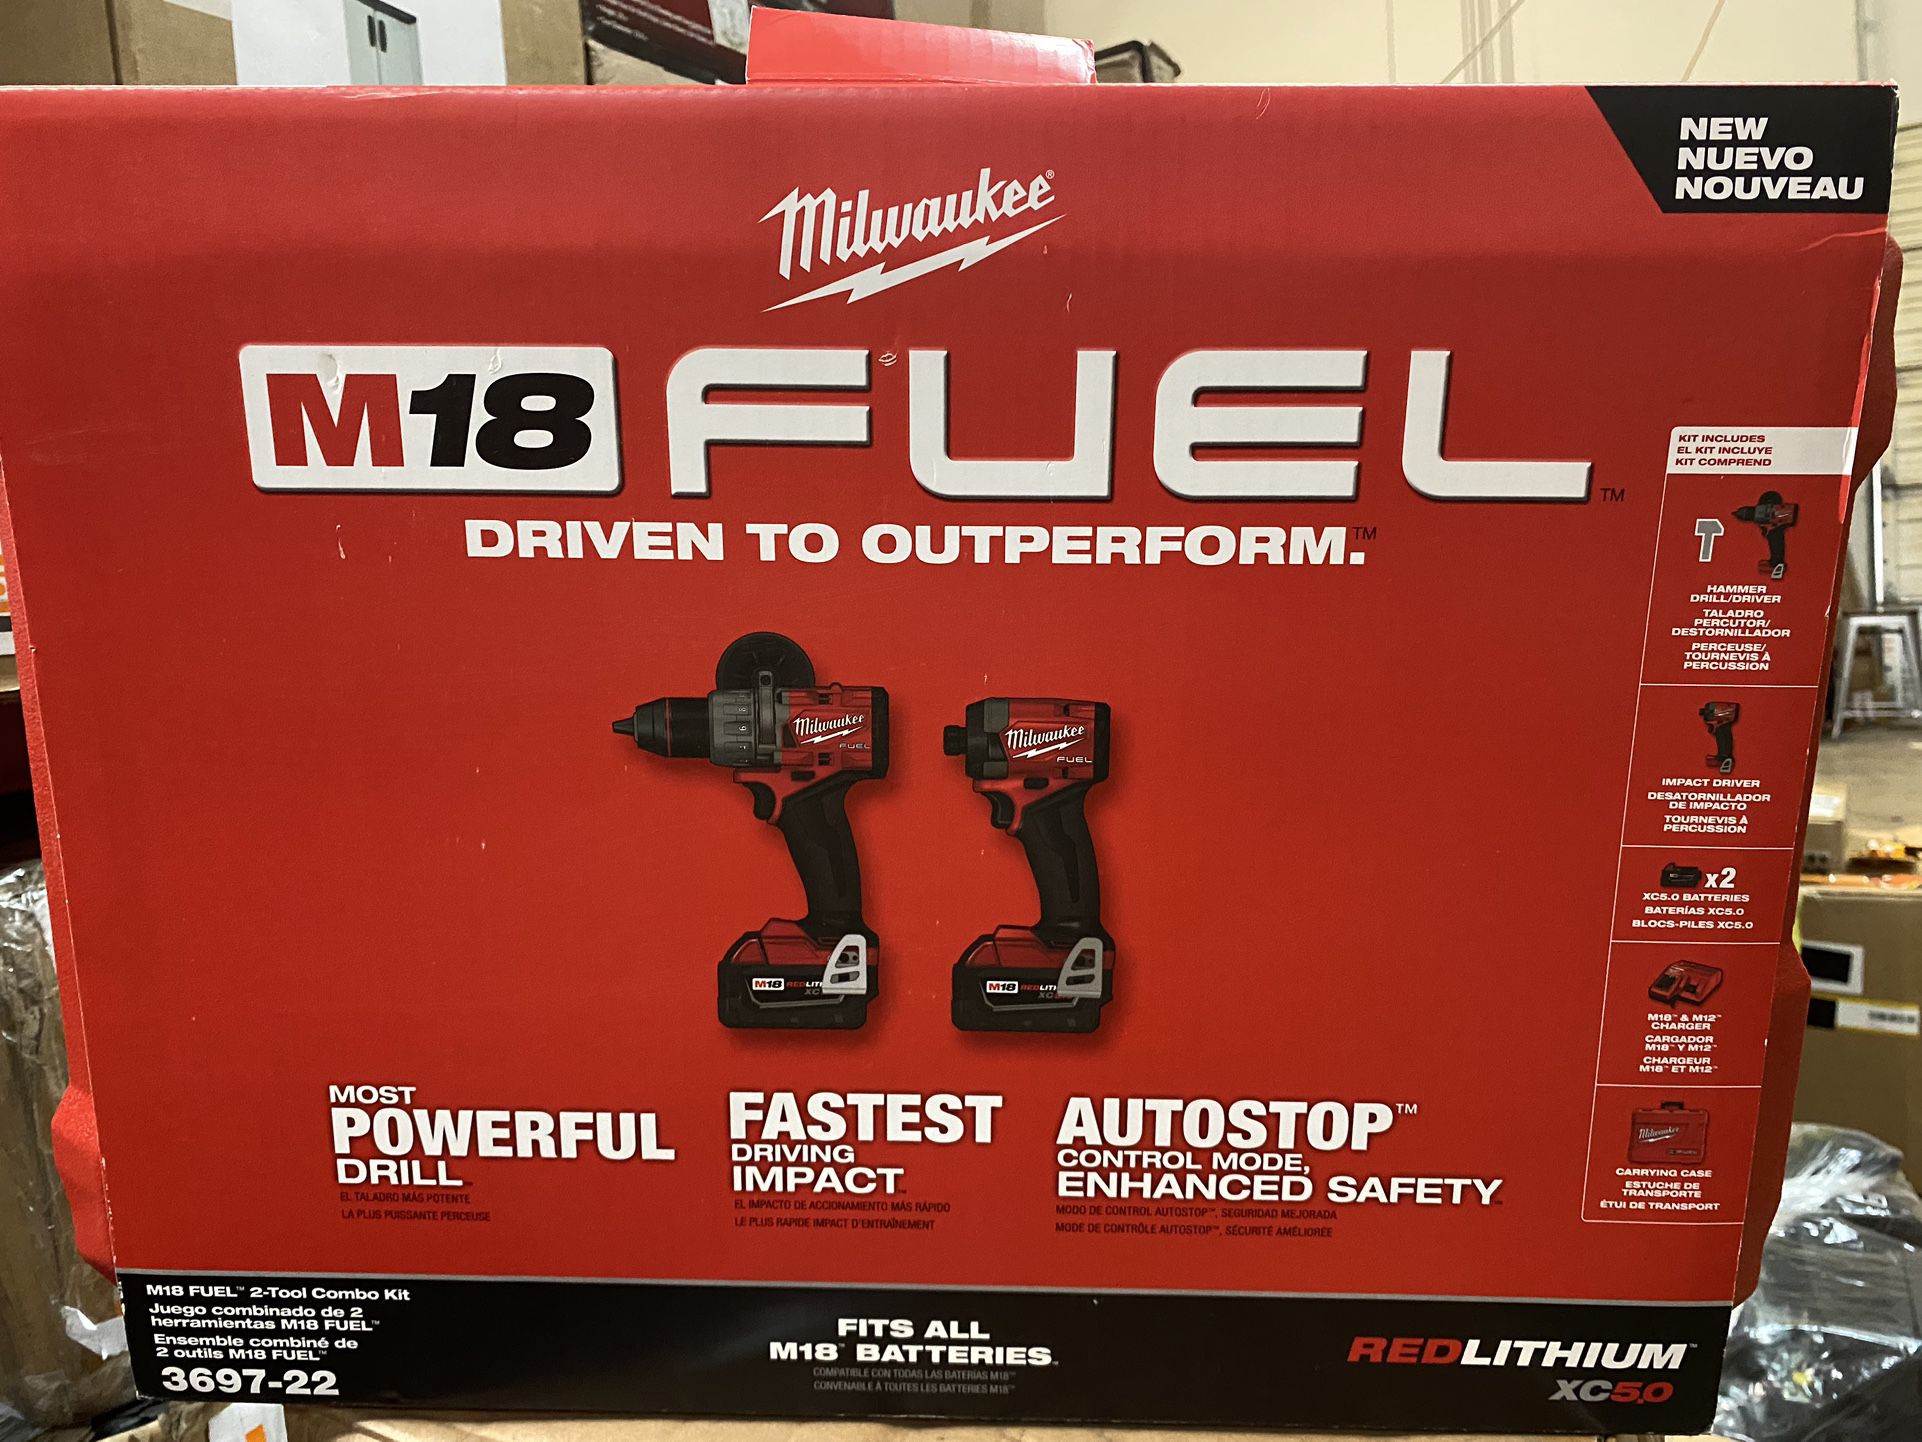 BRAND NEW AMD COMPLETE Milwaukee M18 FUEL 18V Lithium-Ion Brushless Cordless Hammer Drill and Impact Driver Combo Kit (2-Tool) with 2 Batteries